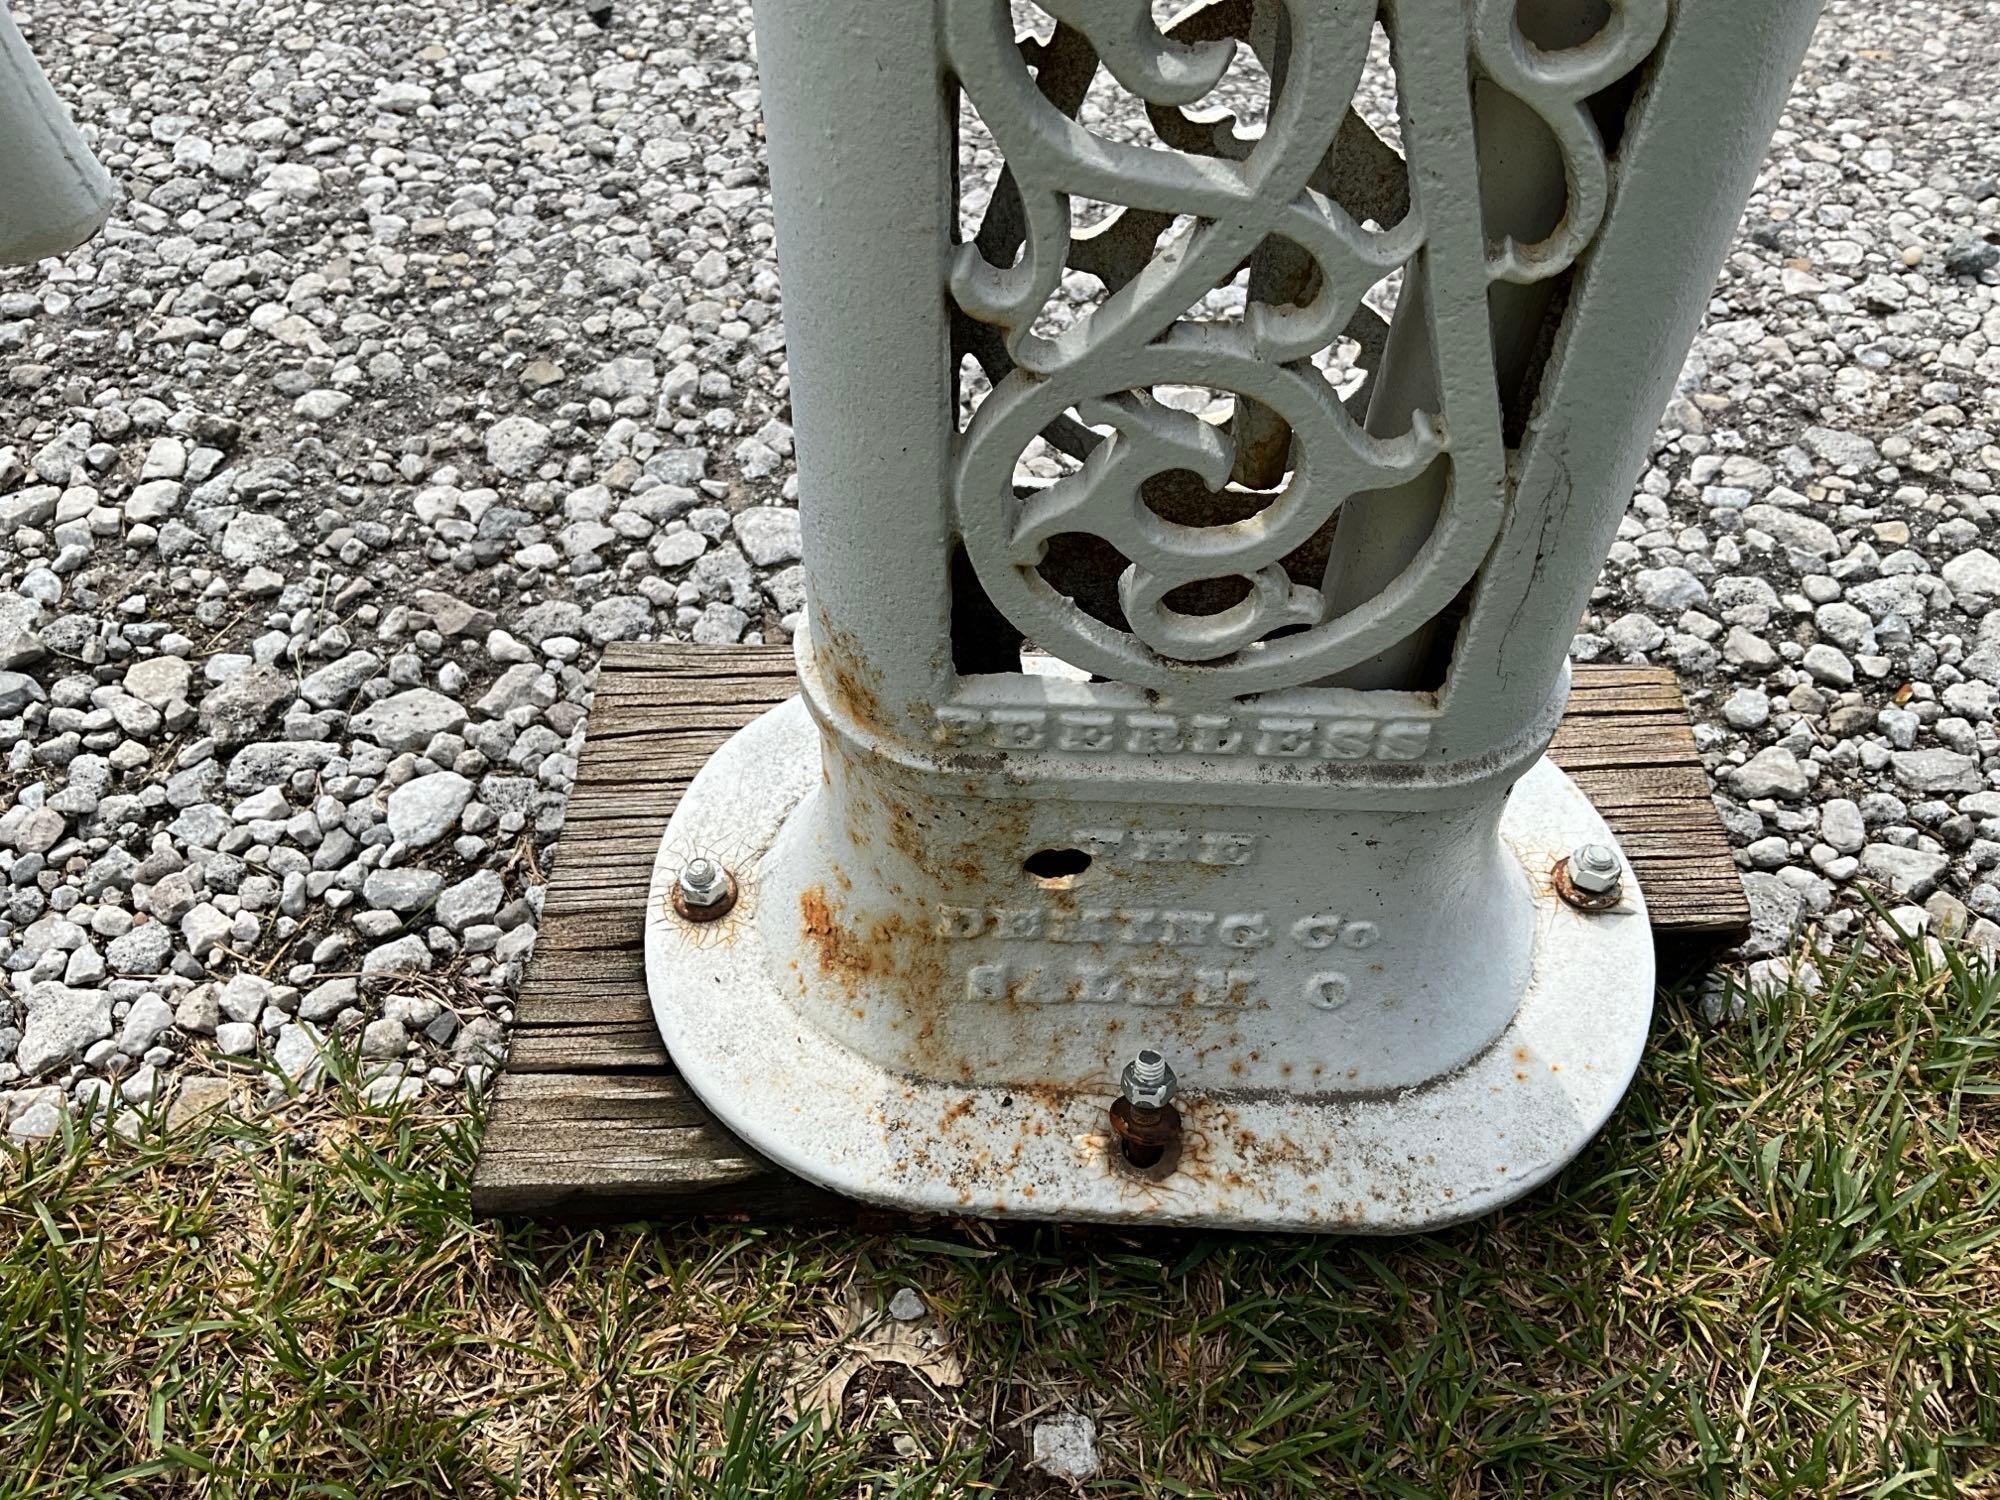 The Deming Co. Peerless well pump